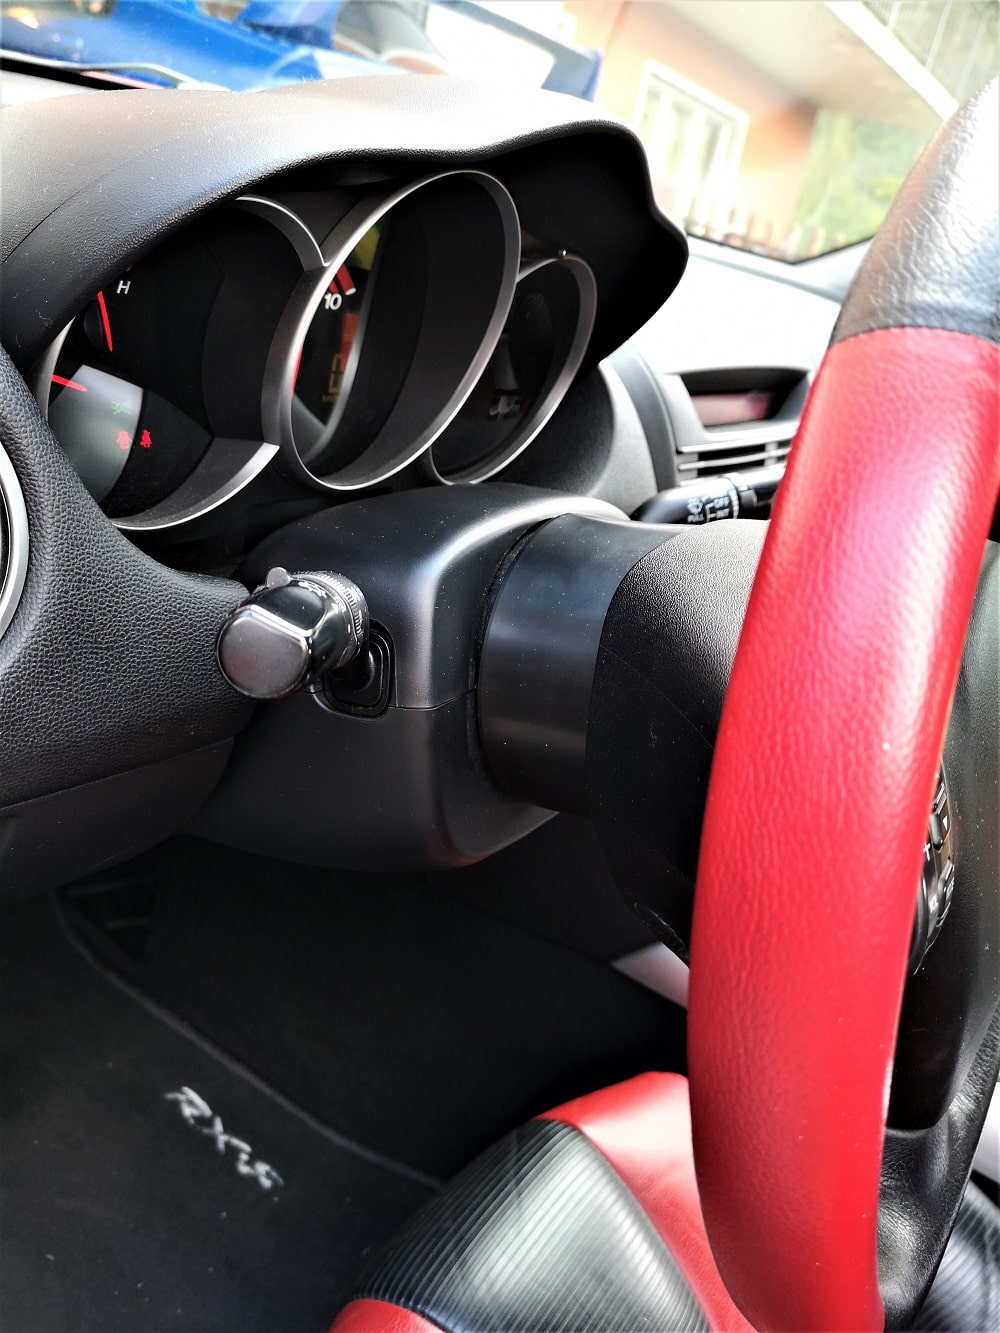 spacershop steering wheel spacer kit to upgrade the Mazda RX-8 driving position